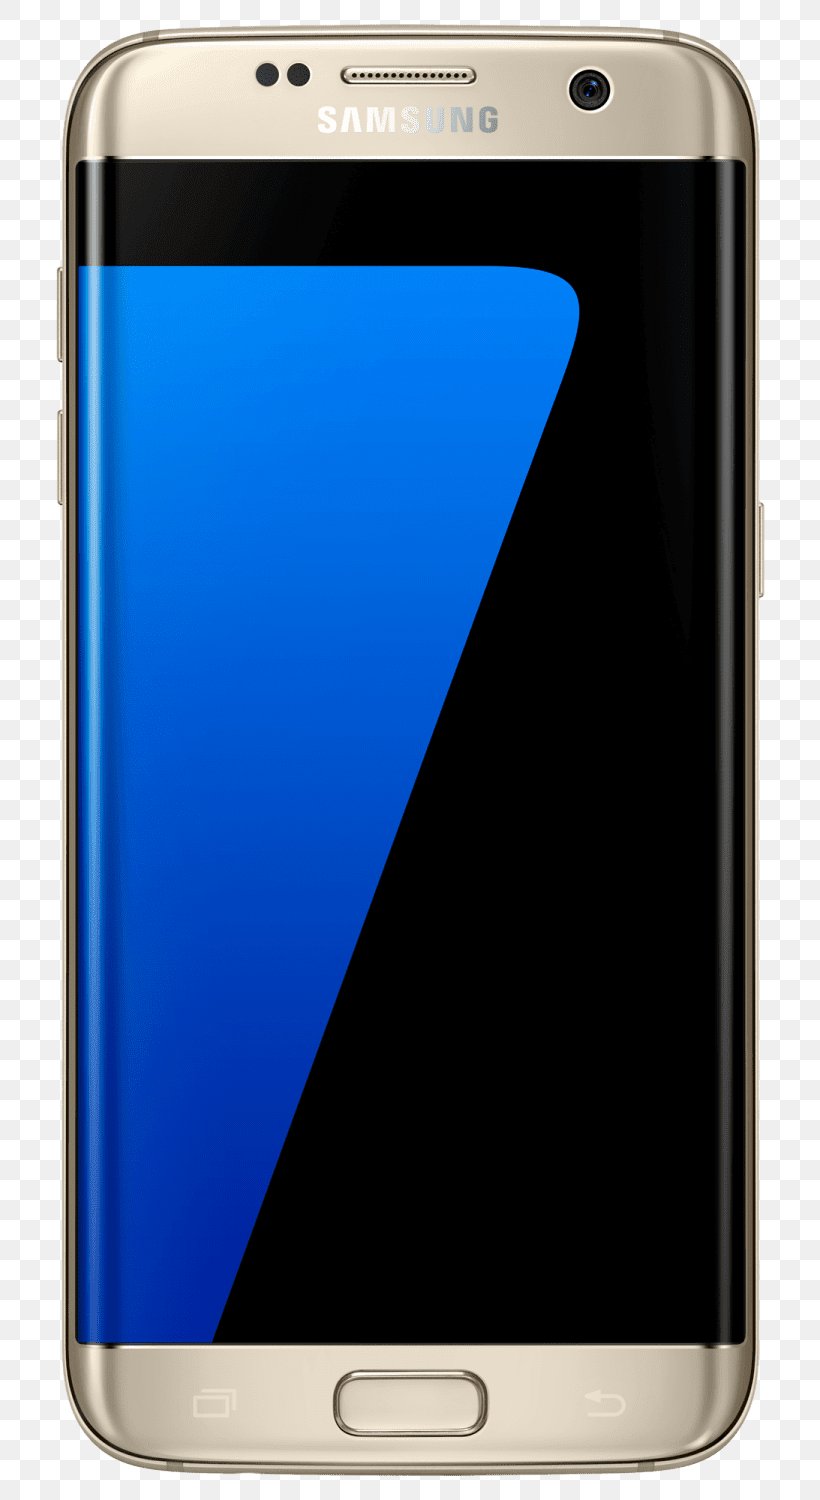 Samsung Galaxy S Plus Telephone 4G Android, PNG, 772x1500px, Samsung Galaxy S Plus, Android, Cellular Network, Communication Device, Electric Blue Download Free